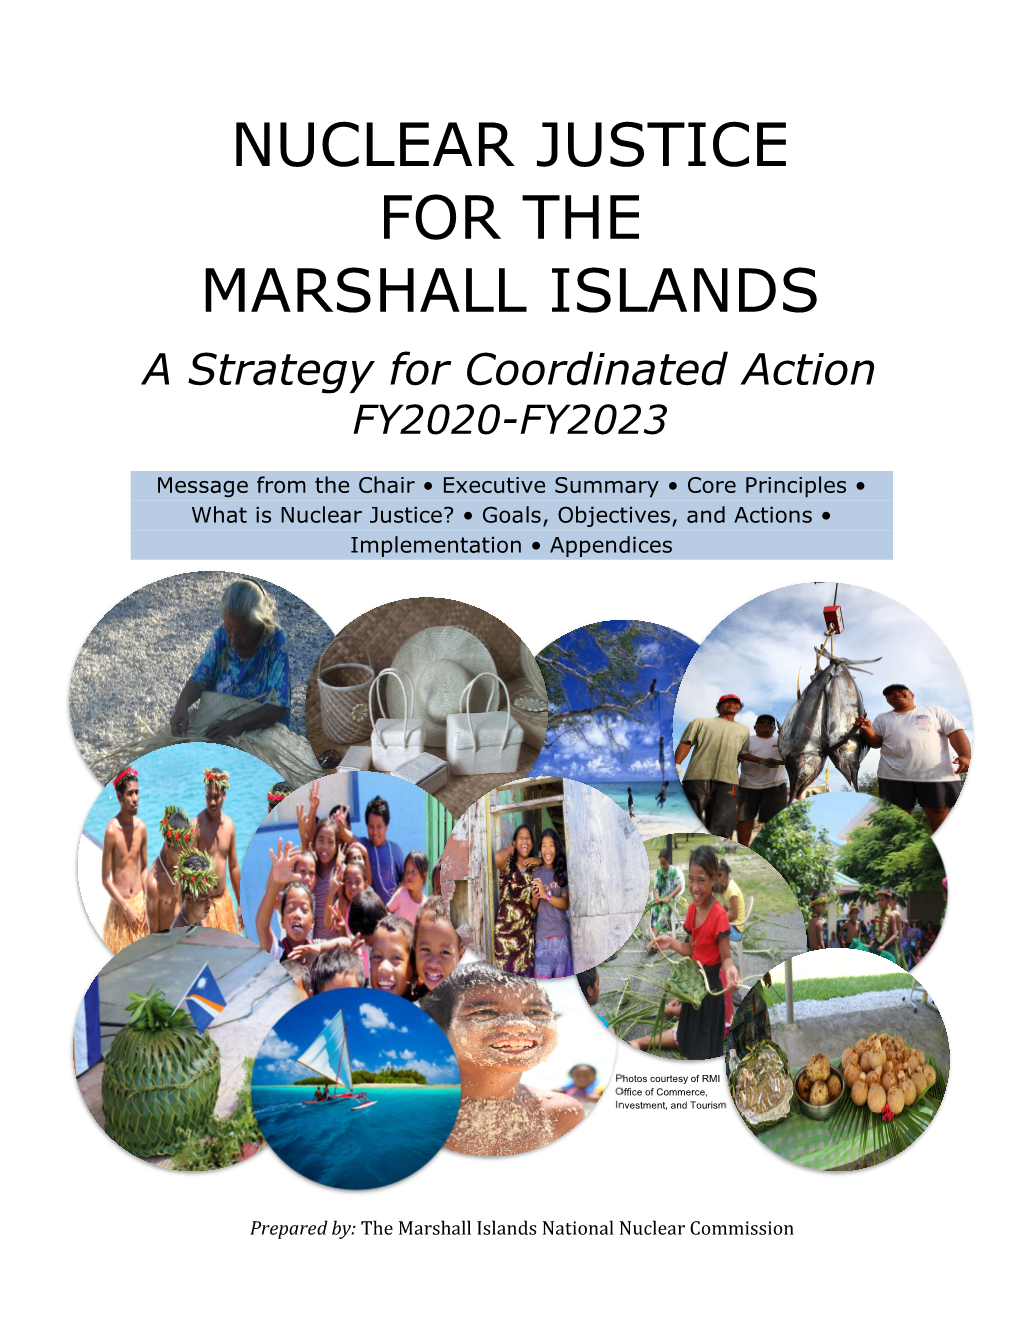 NUCLEAR JUSTICE for the MARSHALL ISLANDS a Strategy for Coordinated Action FY2020-FY2023